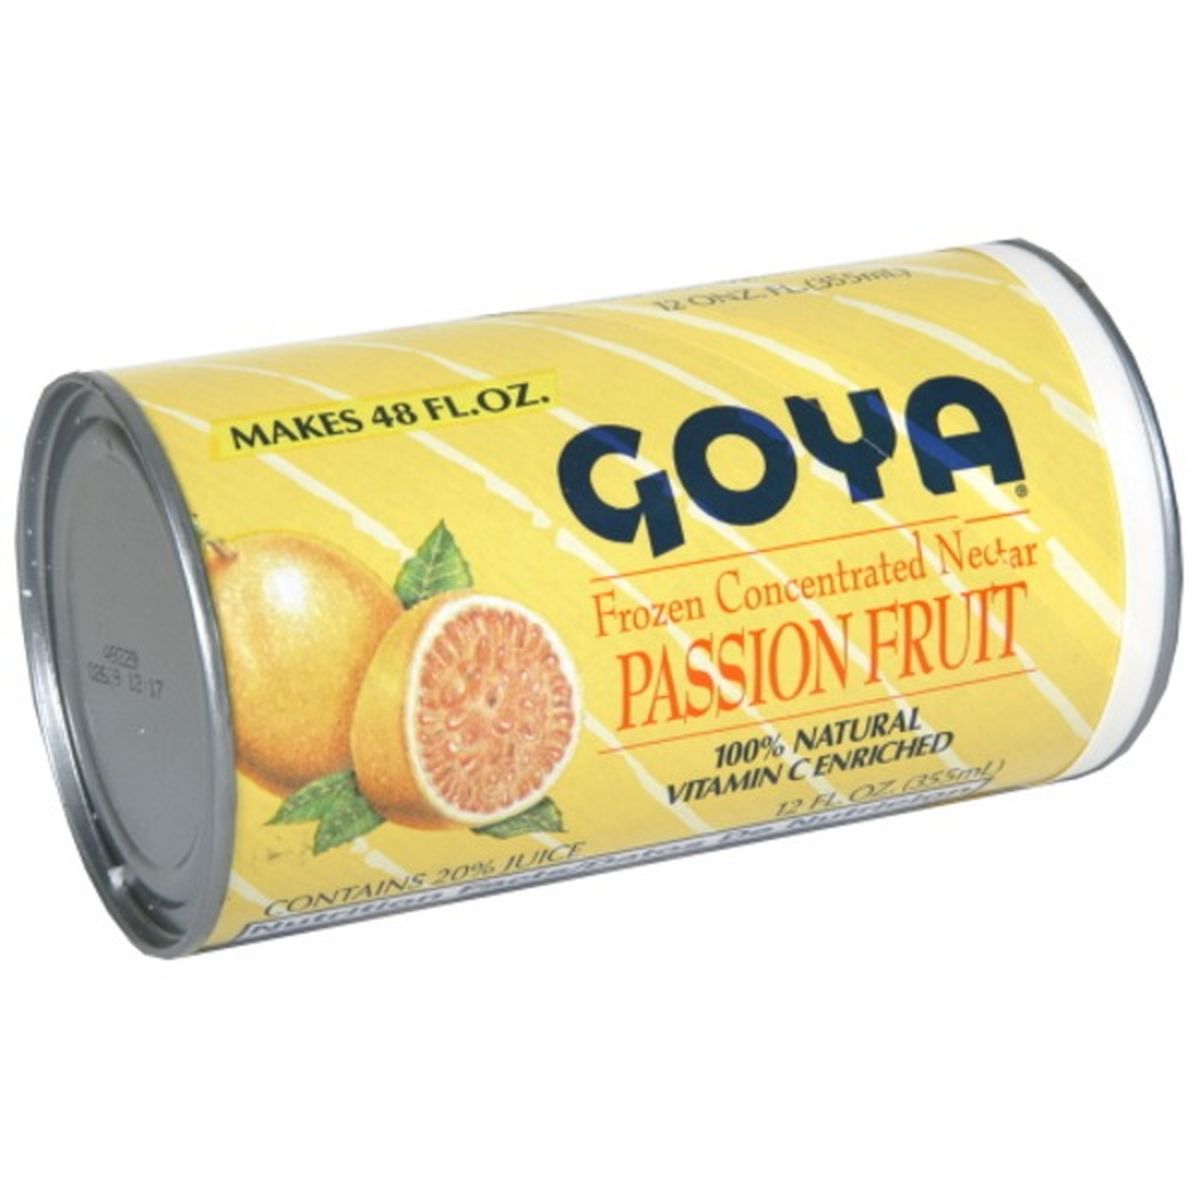 Calories in Goya Frozen Concentrated Nectar, Passion Fruit